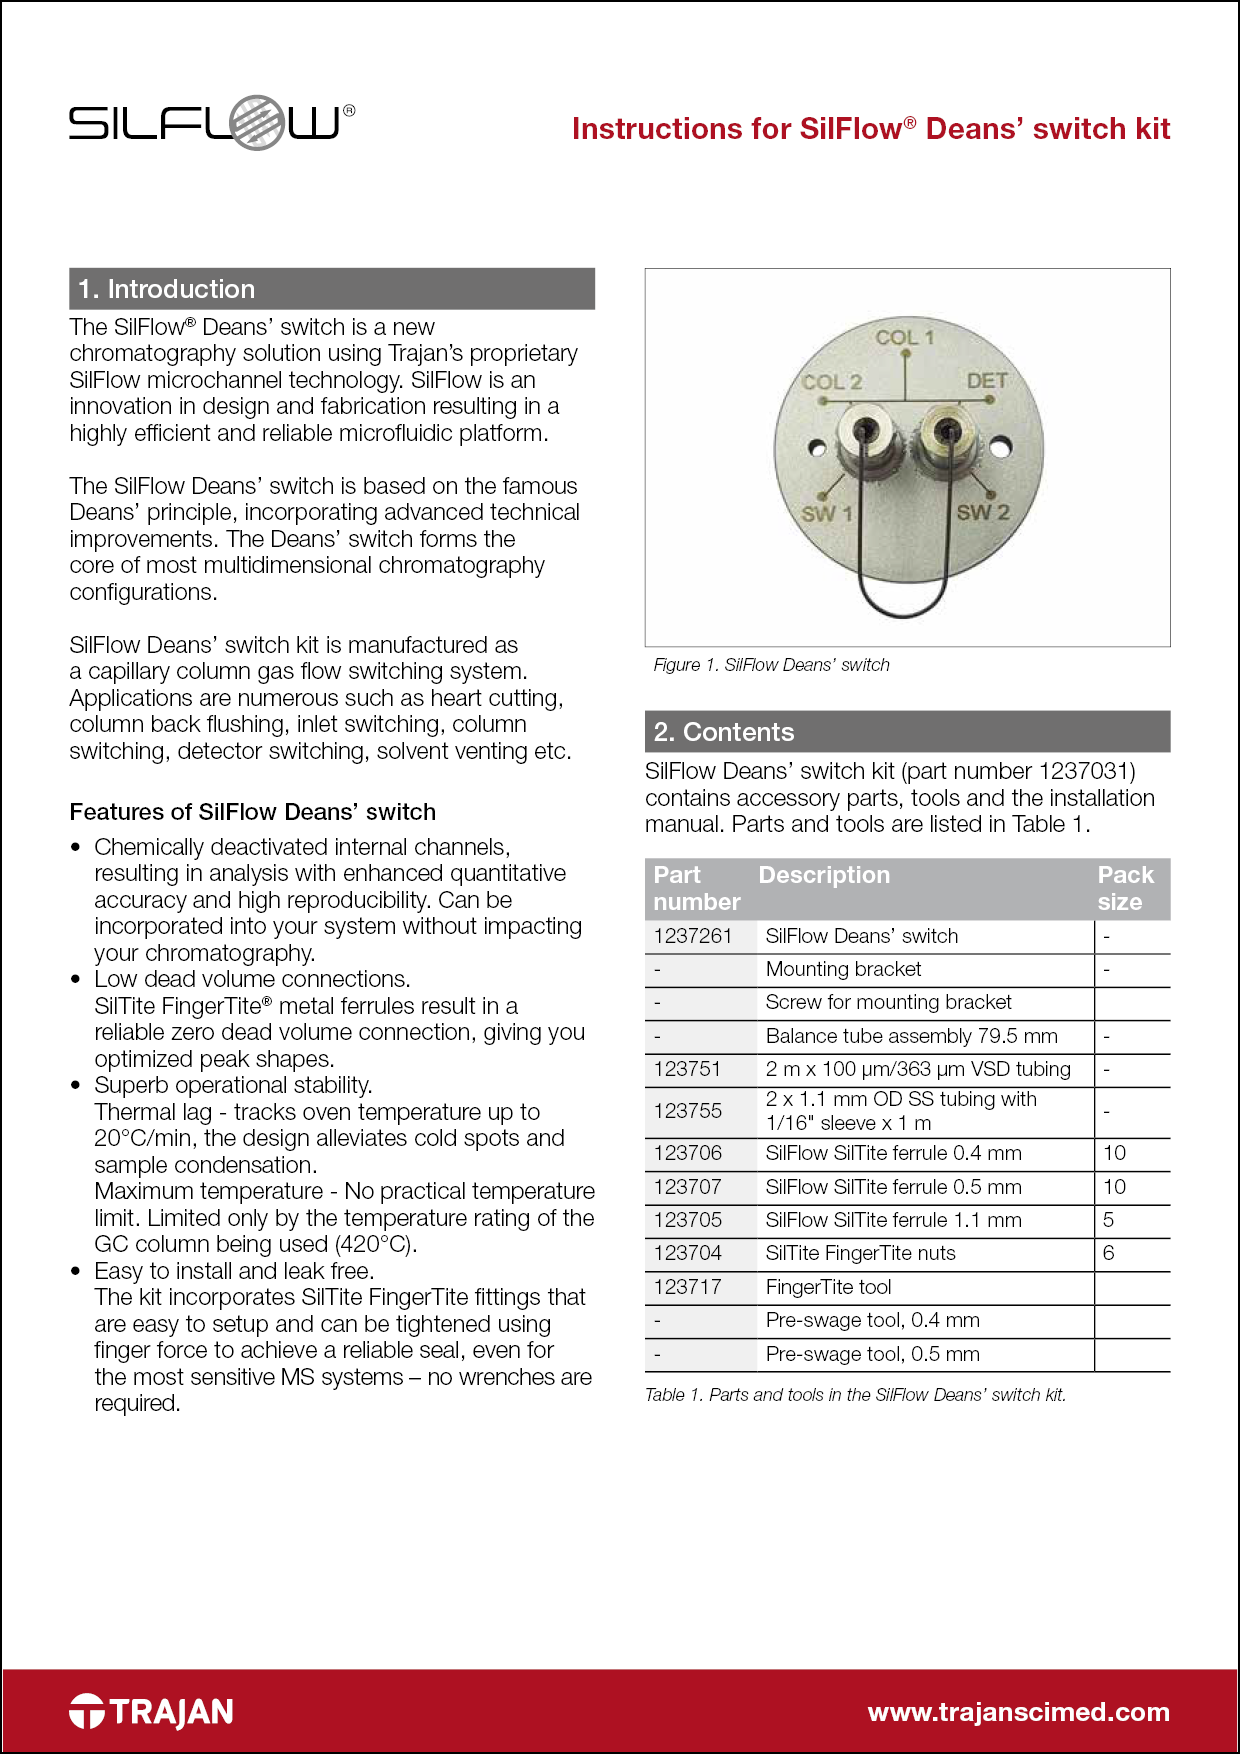 Manual - Instructions for SilFlow Deans' switch kit